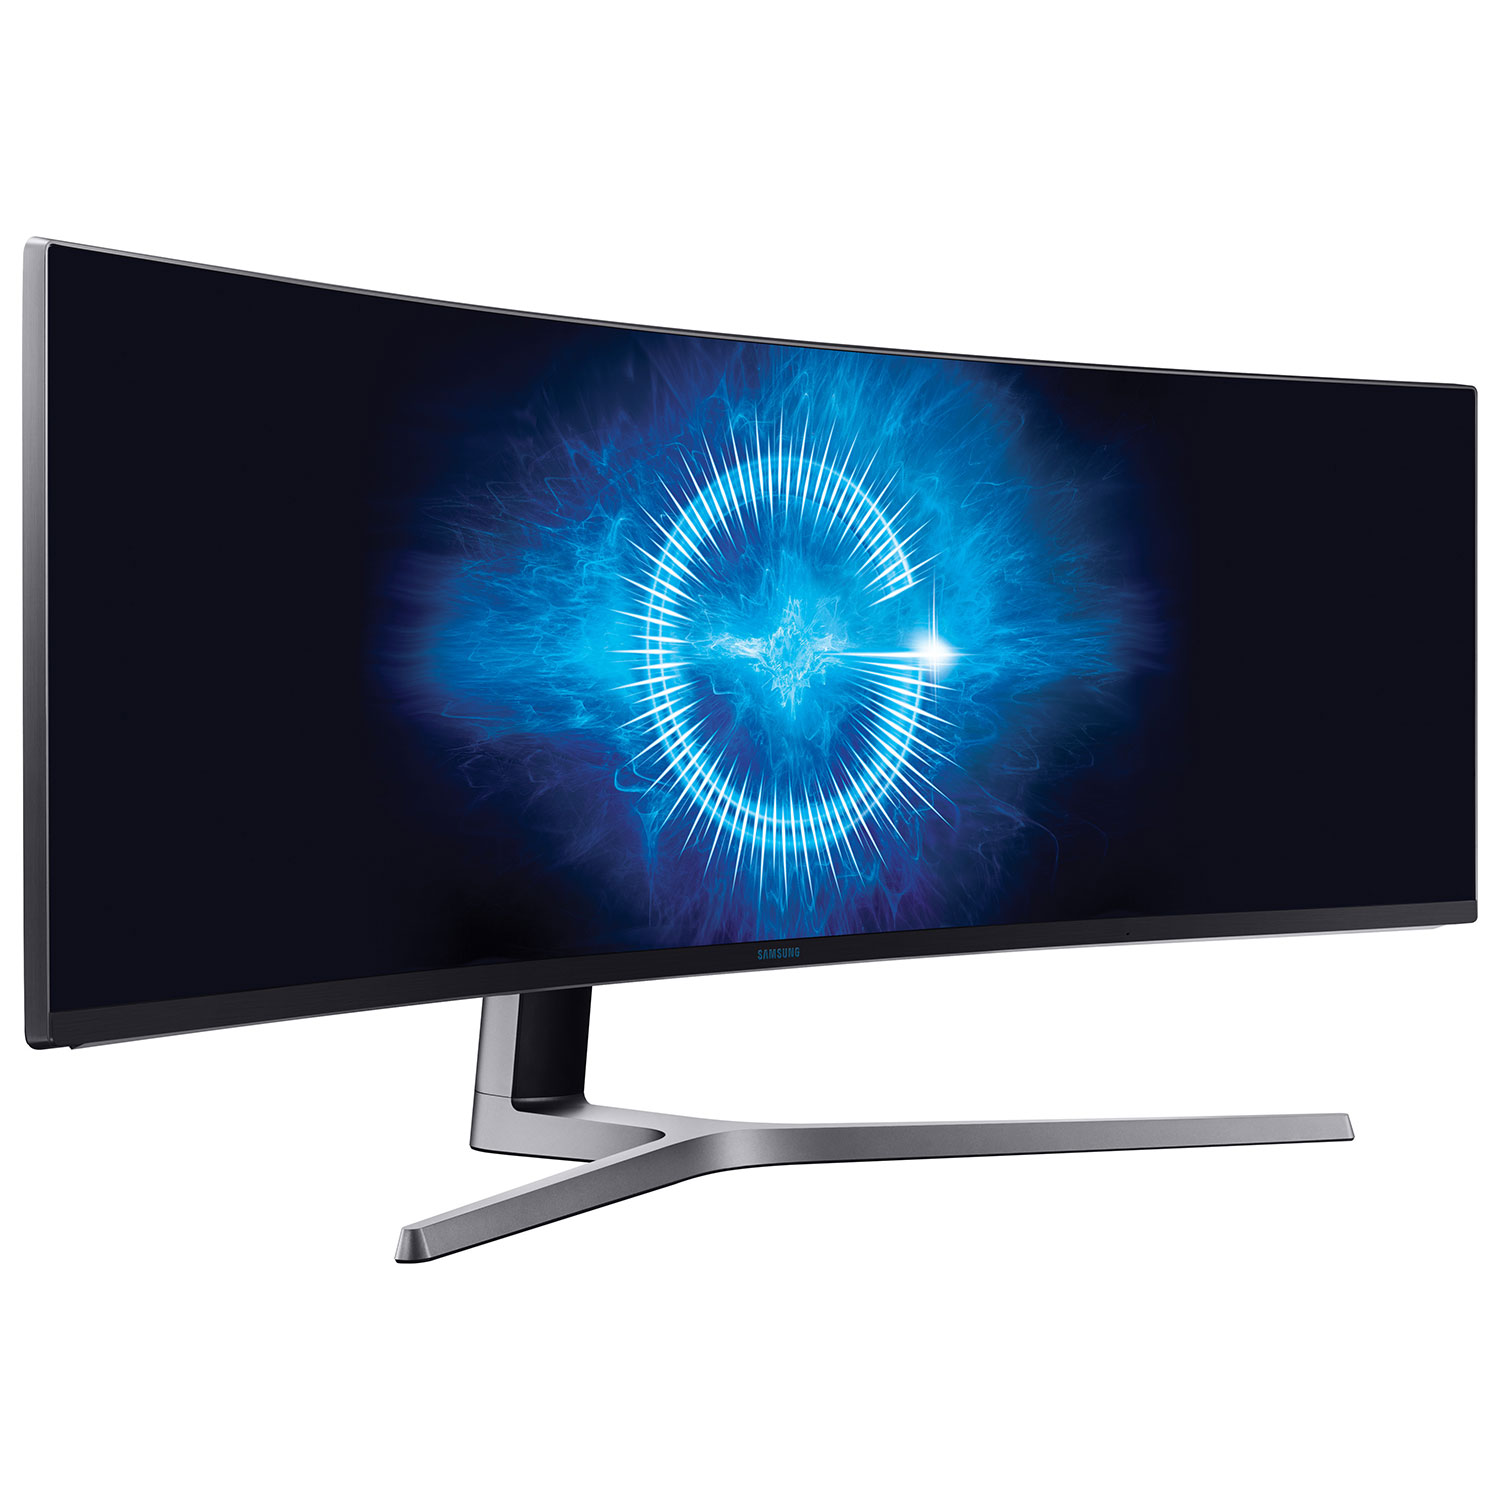 Samsung 49" Ultrawide 144Hz 1ms Curved LED Gaming Monitor (LC49HG90DMNXZA) - Charcoal Black